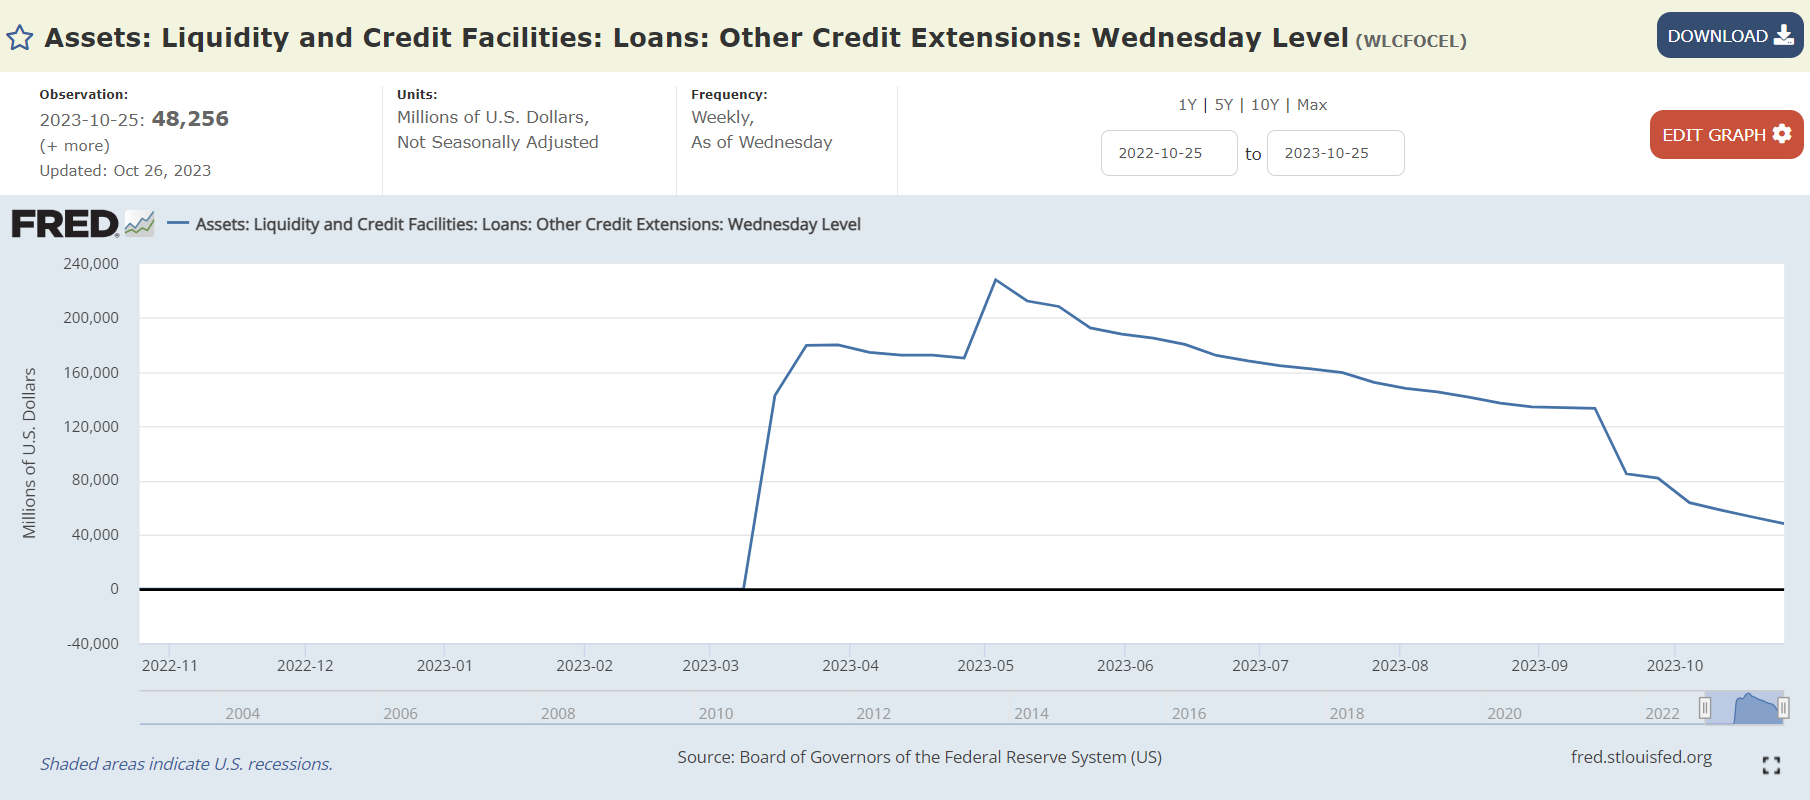  Assets: Liquidity and Credit Facilities: Loans: Other Credit Extensions: Wednesday Level